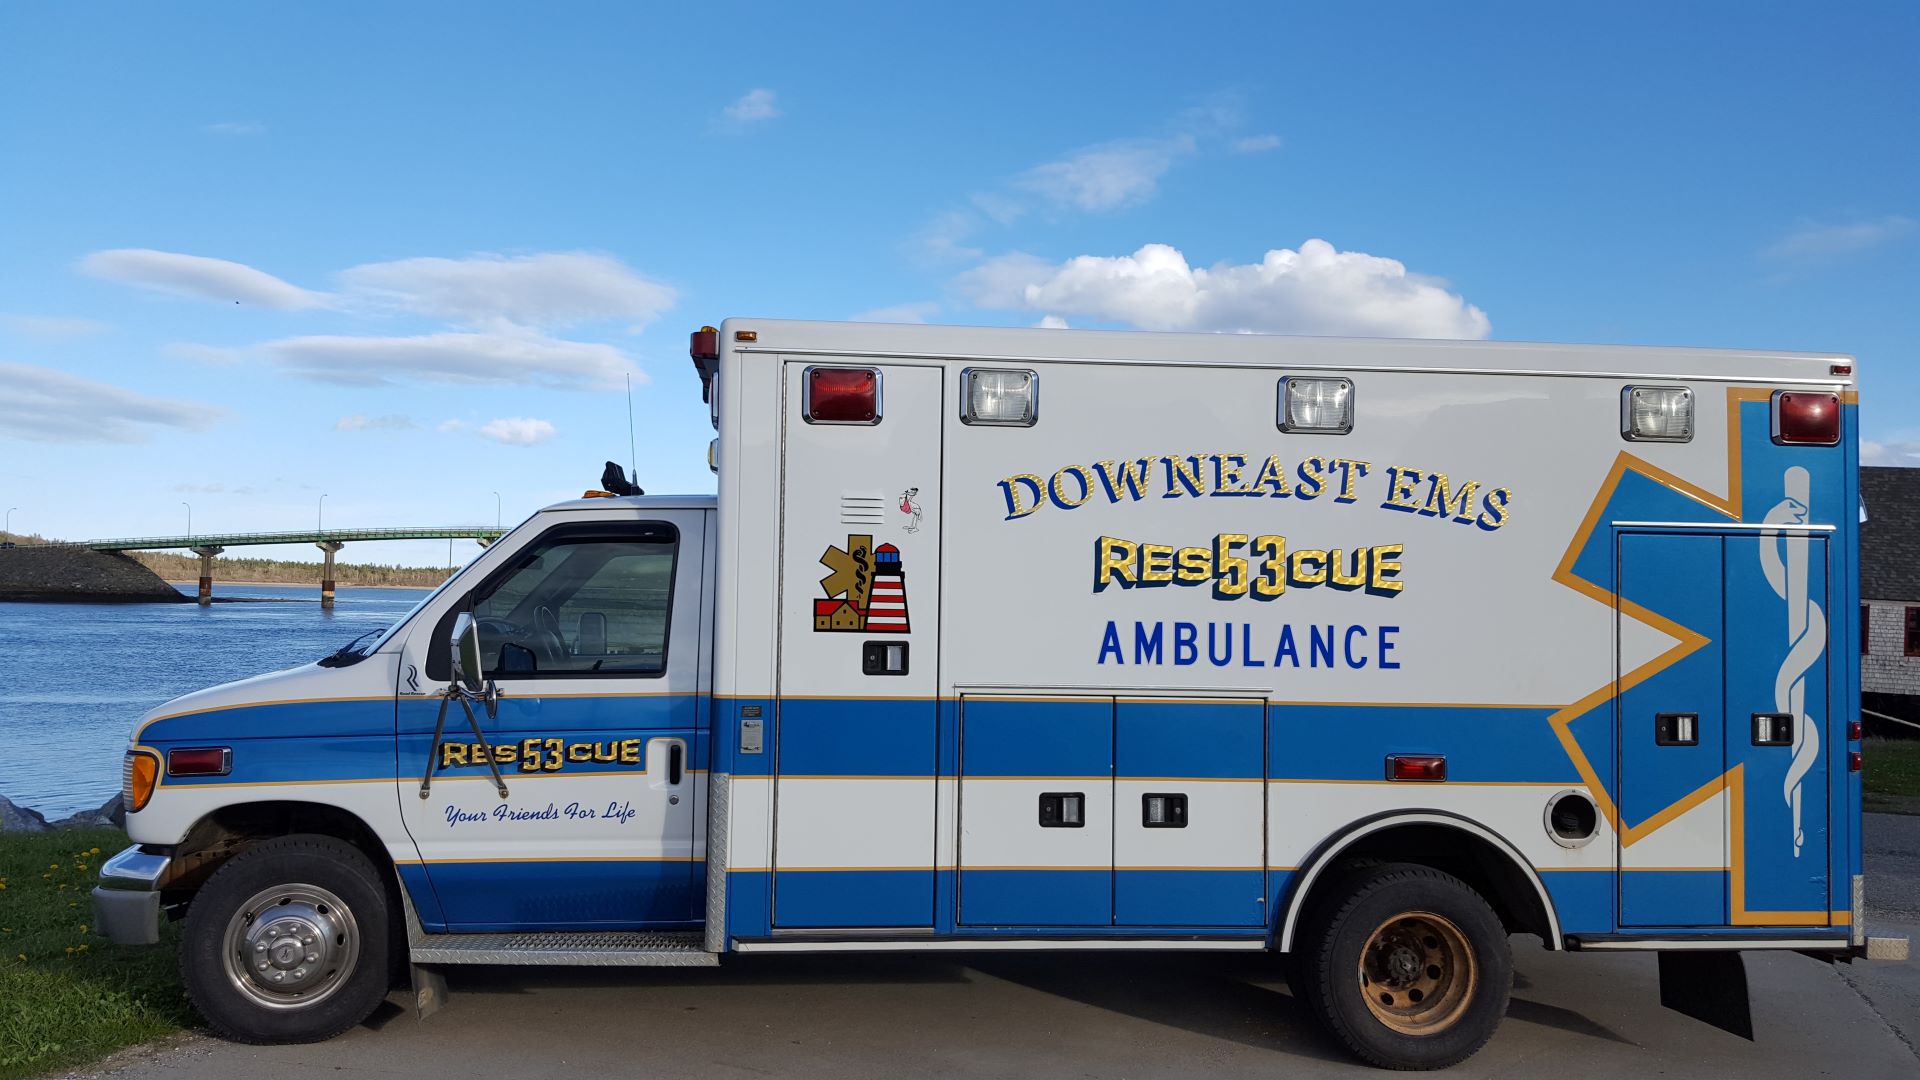 https://themainemonitor.org/wp-content/uploads/2023/08/downeast-ambulance-08-2023.jpg